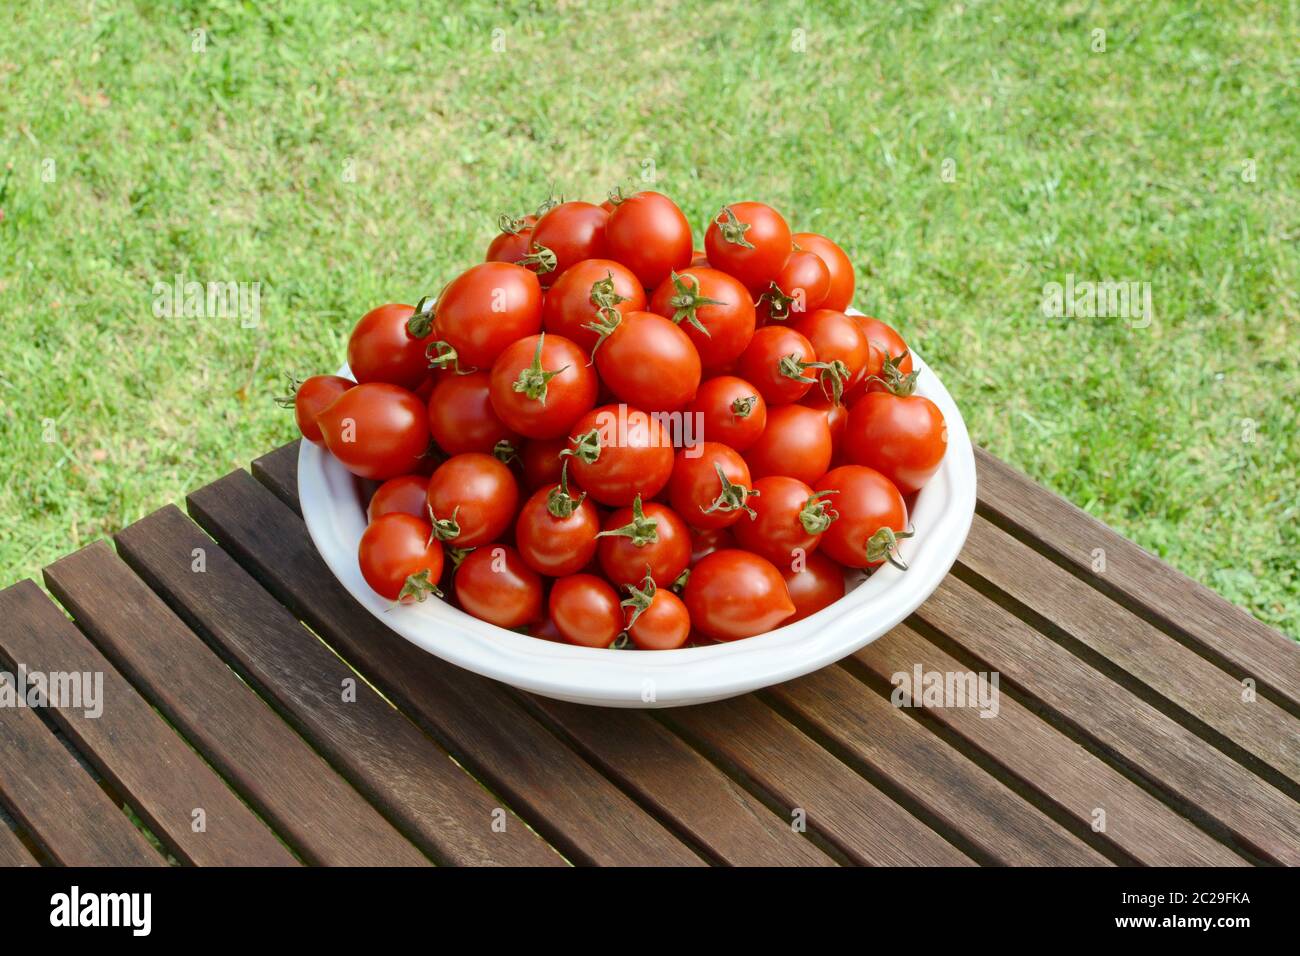 Large heap of juicy fresh Red Alert cherry tomatoes in a white ceramic serving dish on a wooden garden table Stock Photo